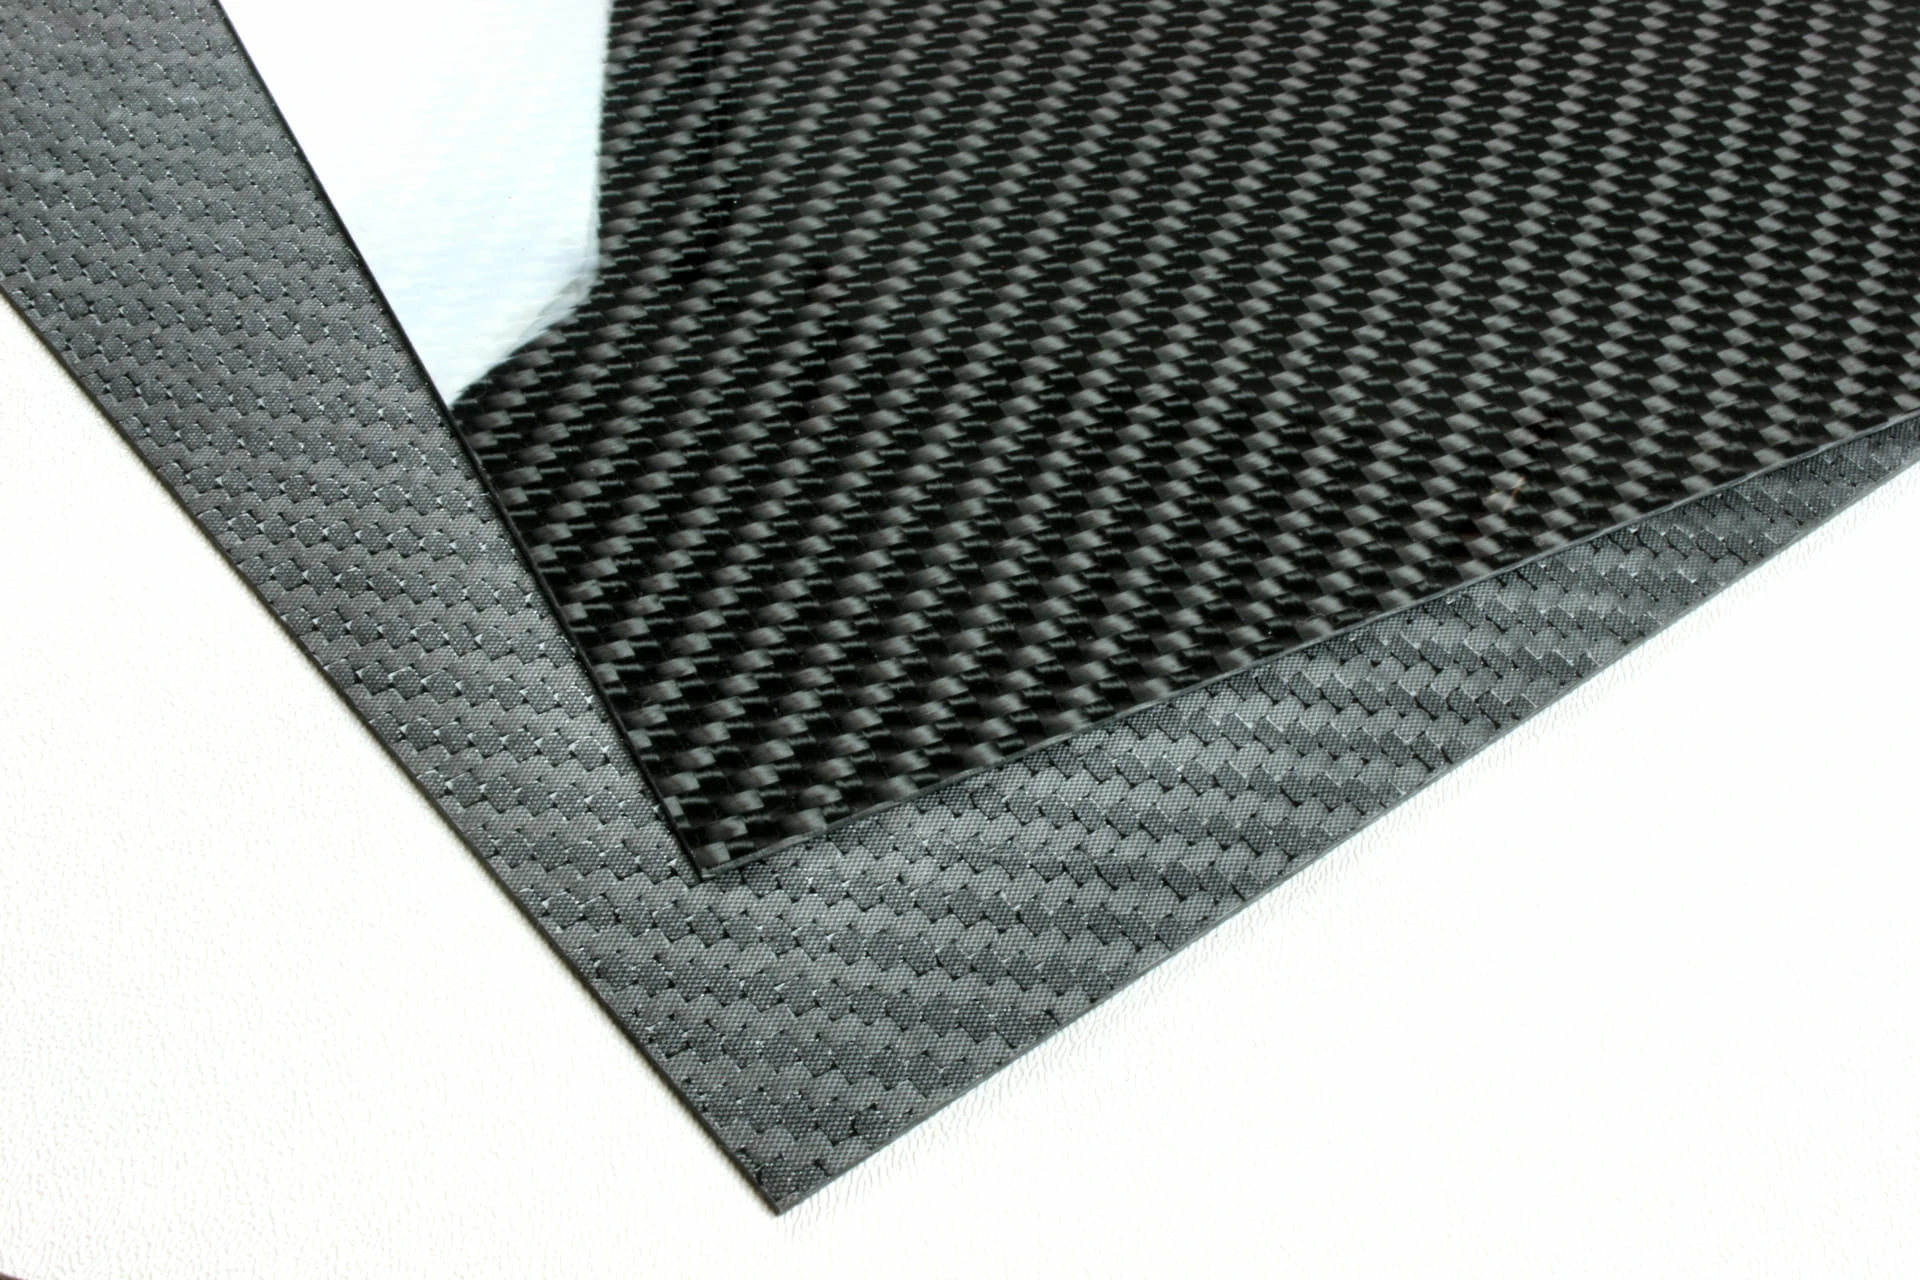 Real Carbon Fiber Sheet/Panel/Plate, 1/4 inch x 12 inch x 12 inch 